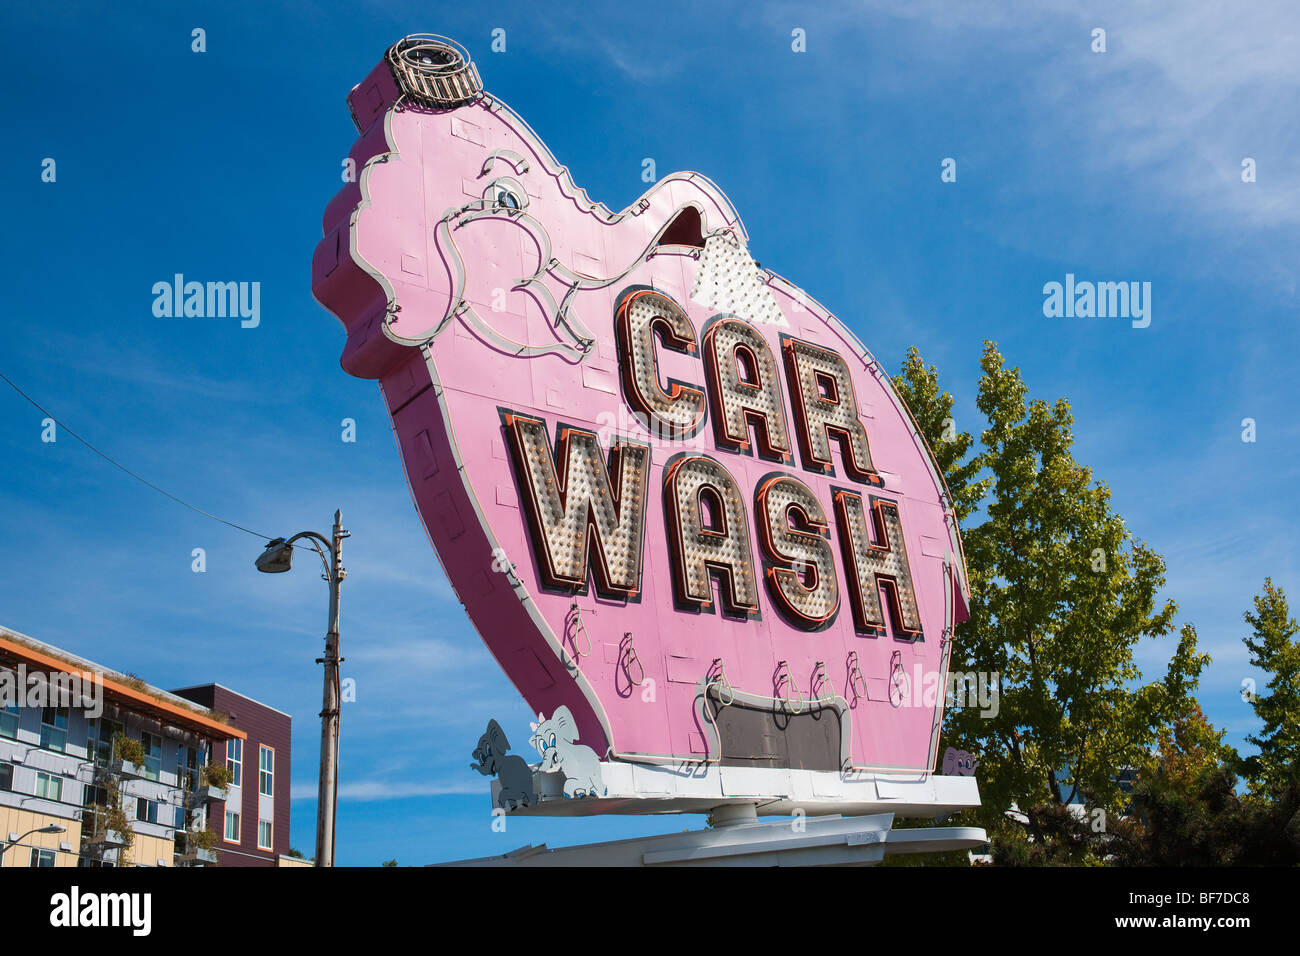 The pink elephant car wash rotating sign stands out as a humorous tasteless detail in the Seattle city. Stock Photo